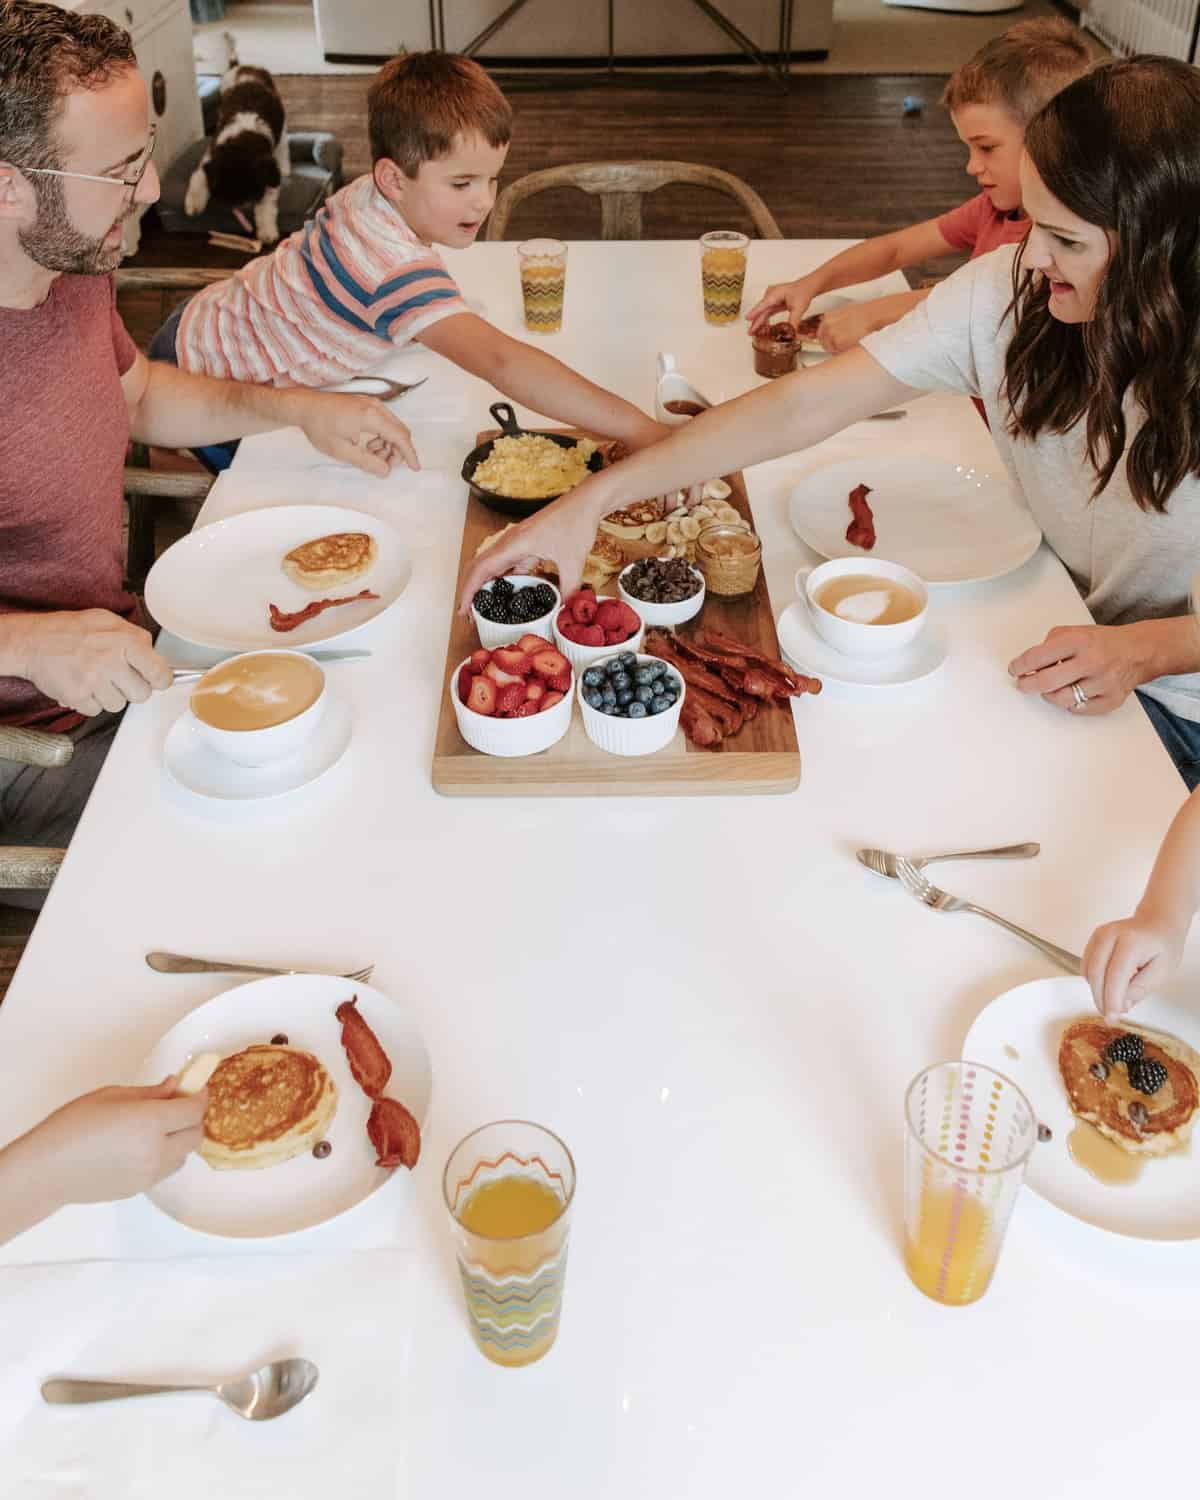 Sunday Family Breakfast Tradition: Live Deliciously!